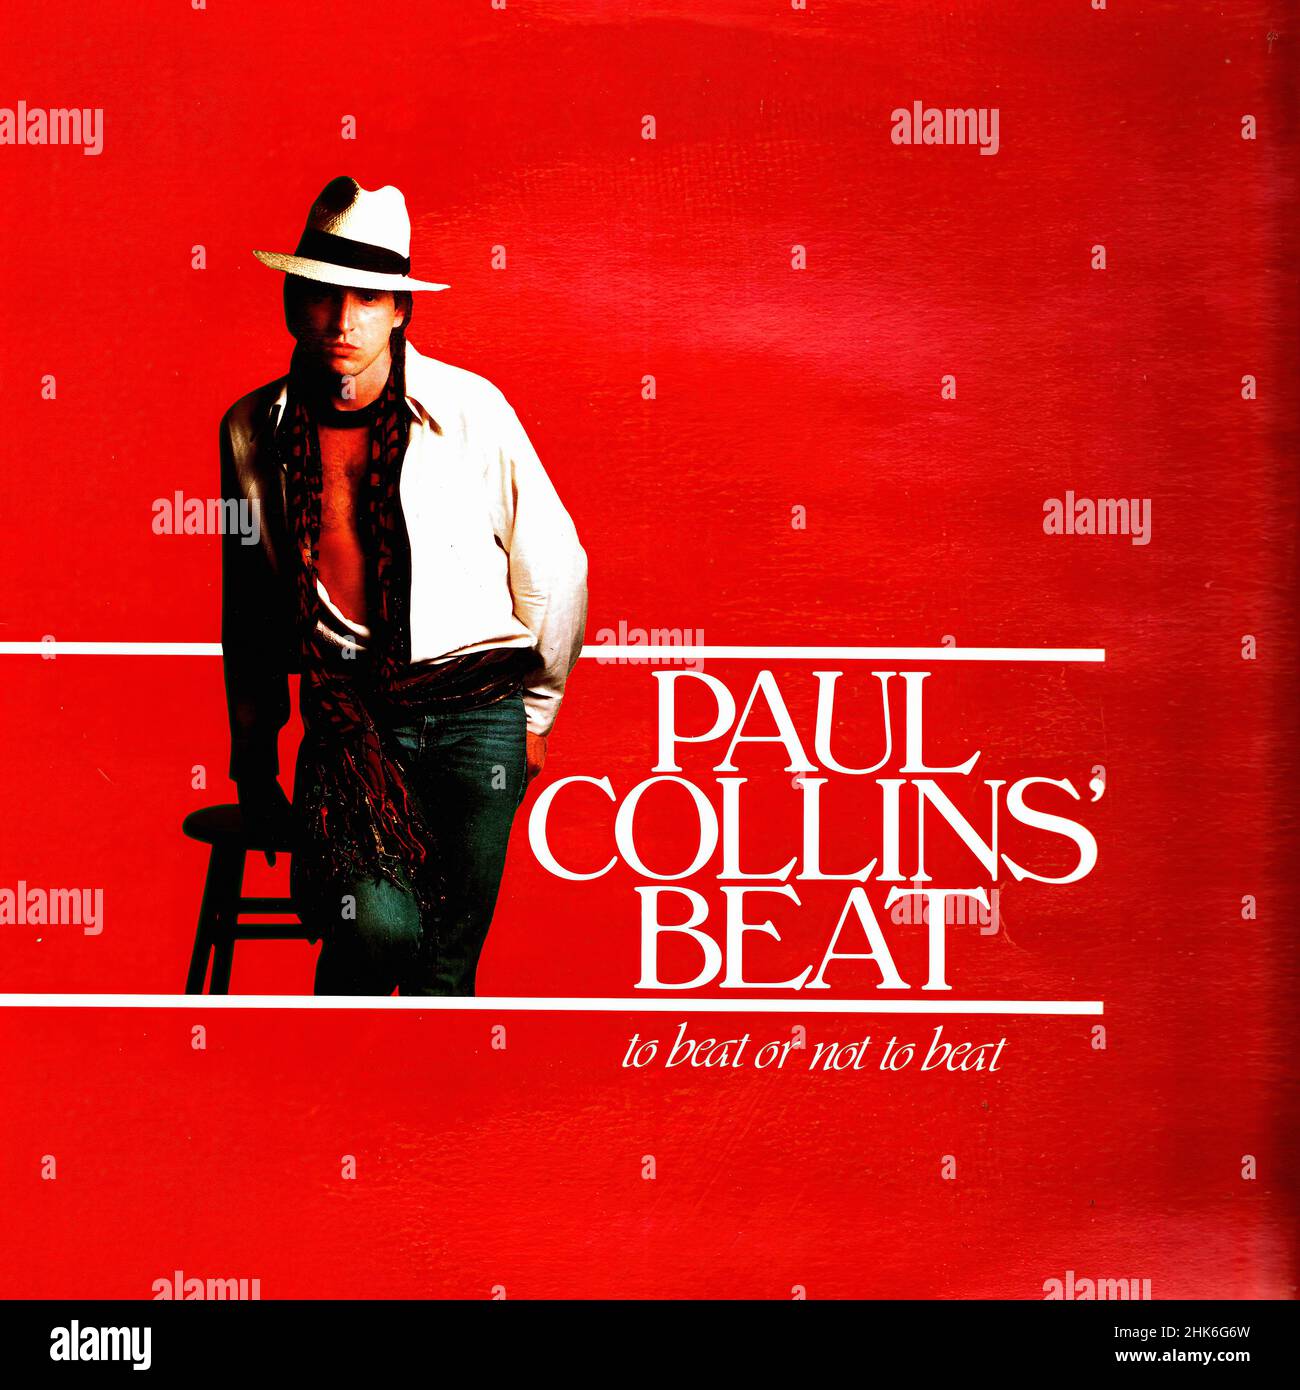 Vintage vinyl record cover - Paul Collins' Beat - To Beat Or Not To Beat - F - 1984 Stock Photo